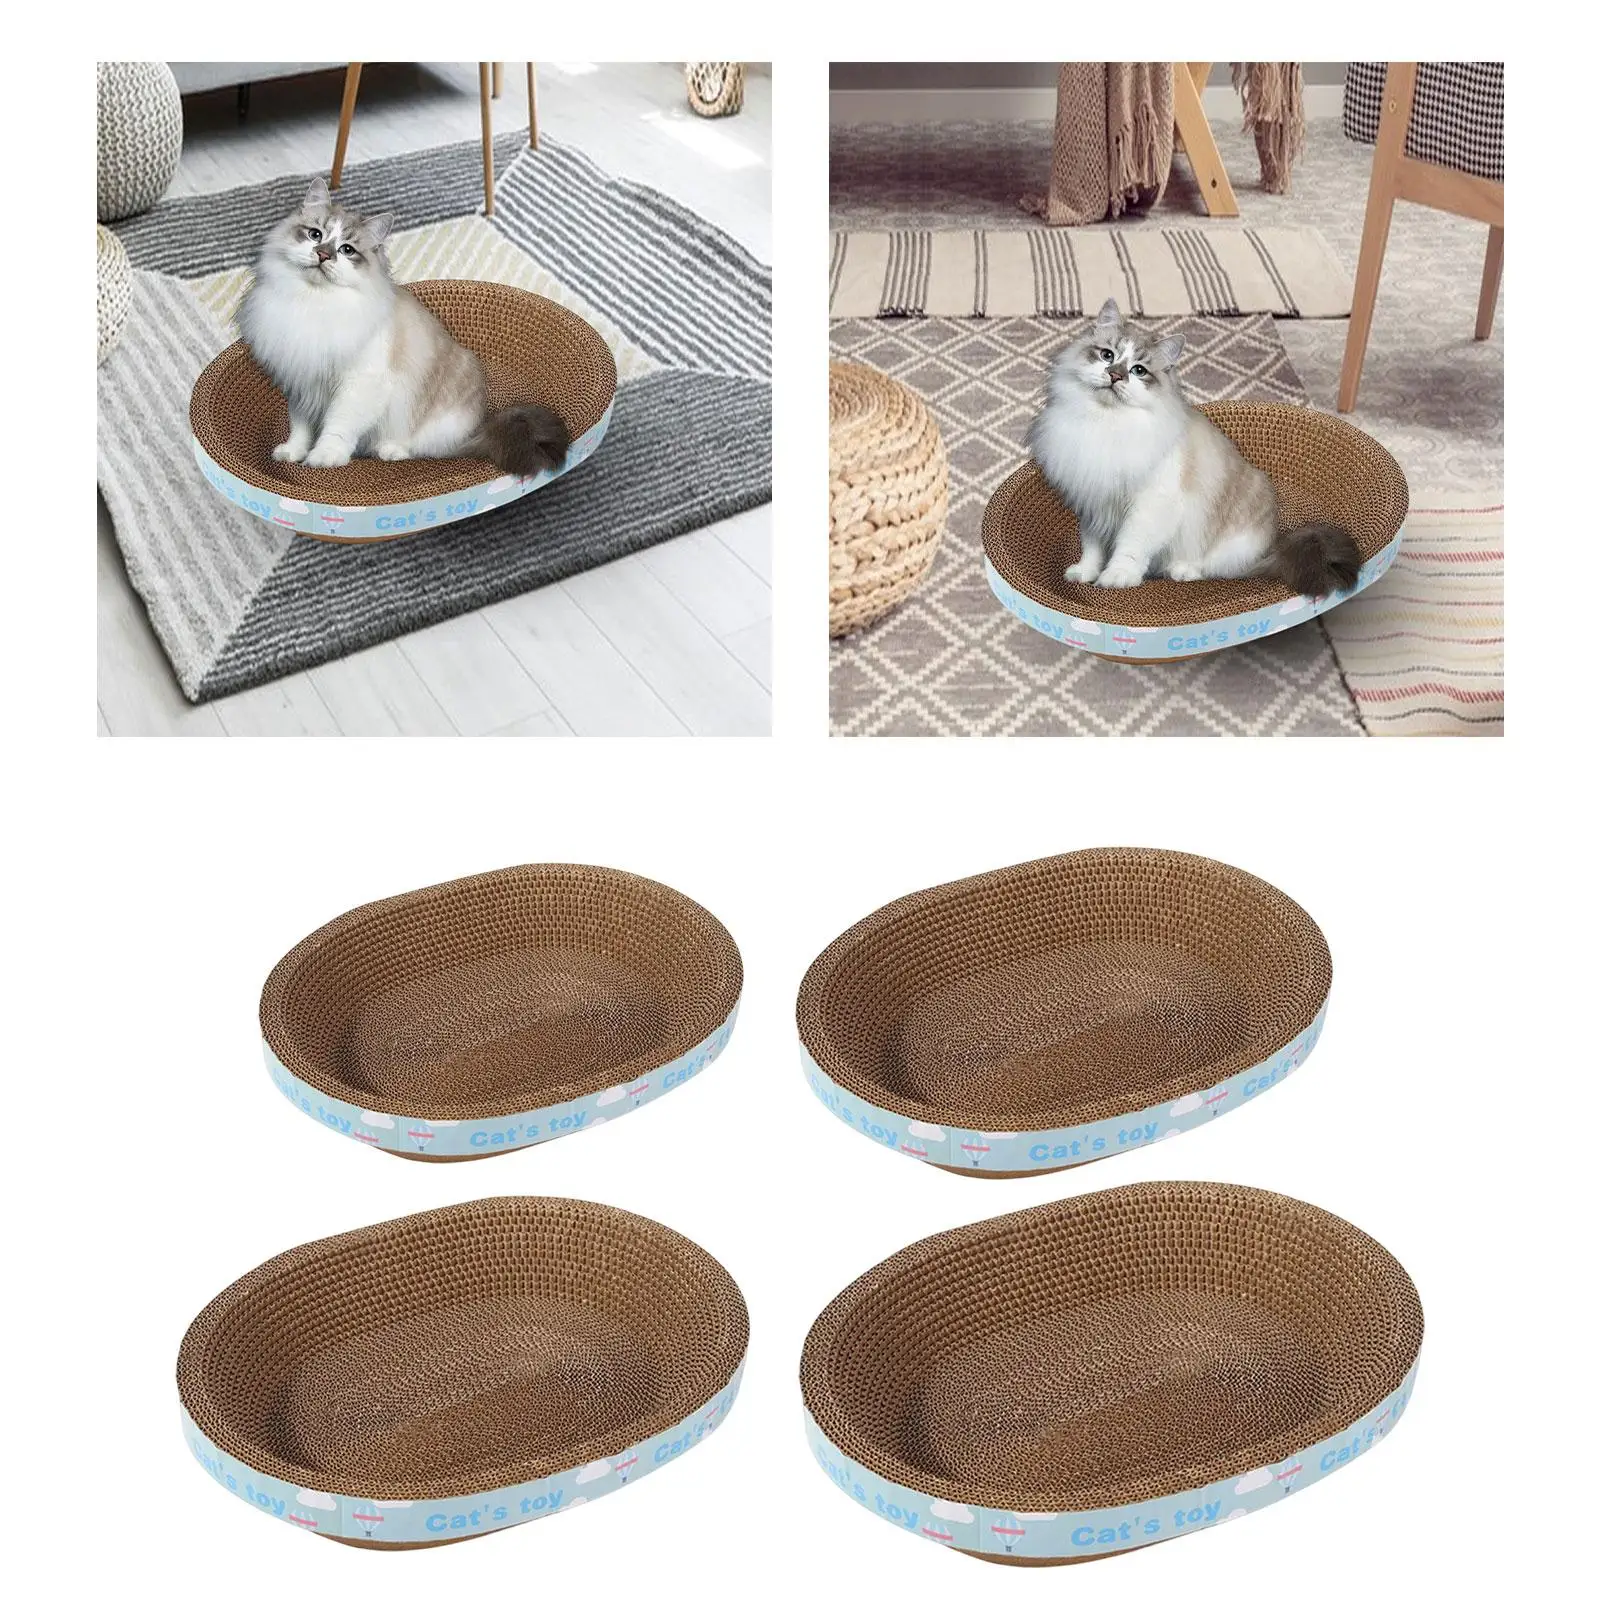 Cat Scratcher Cardboard Scratching Lounge Bed Nest Interactive Toy Sleeping Corrugated Scratch Pad for Small Medium Large Cats